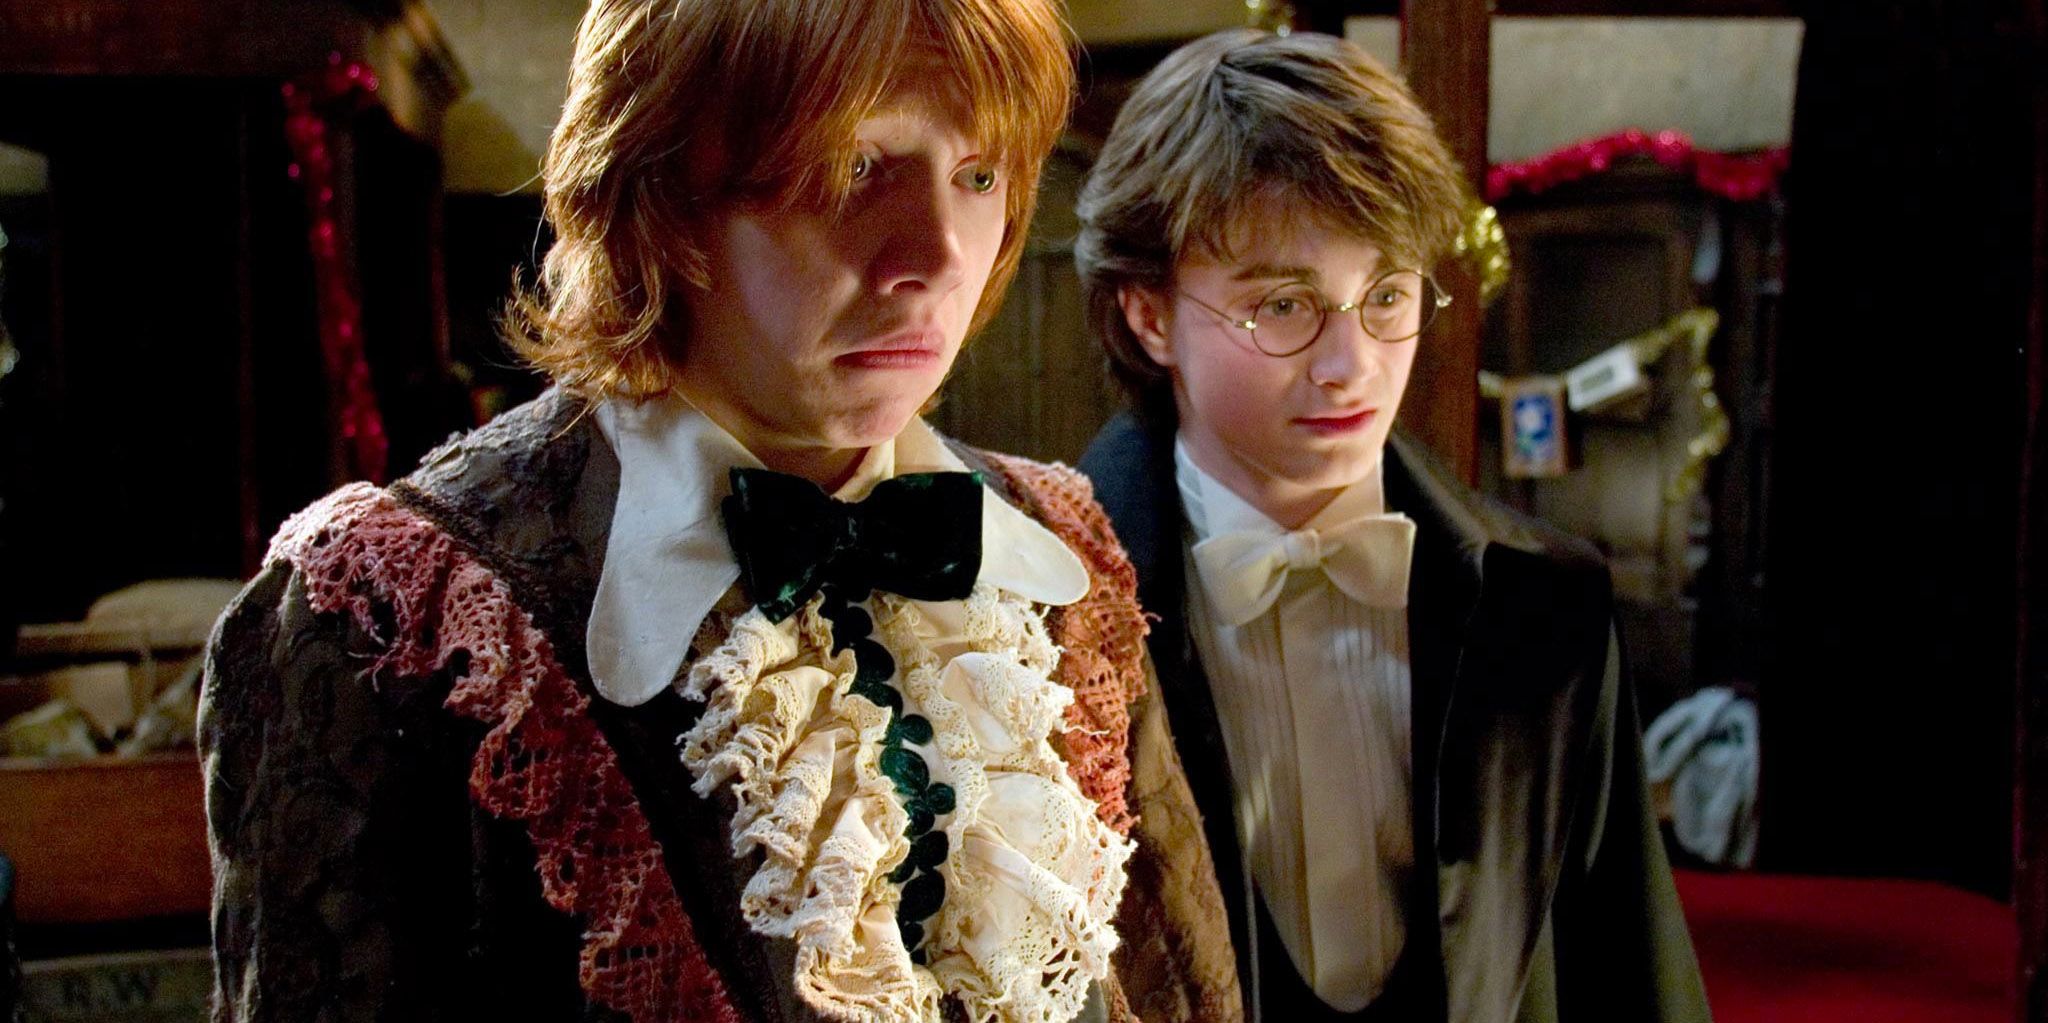 Rob and Harry look in the mirror at Ron's robes at the Yule Ball